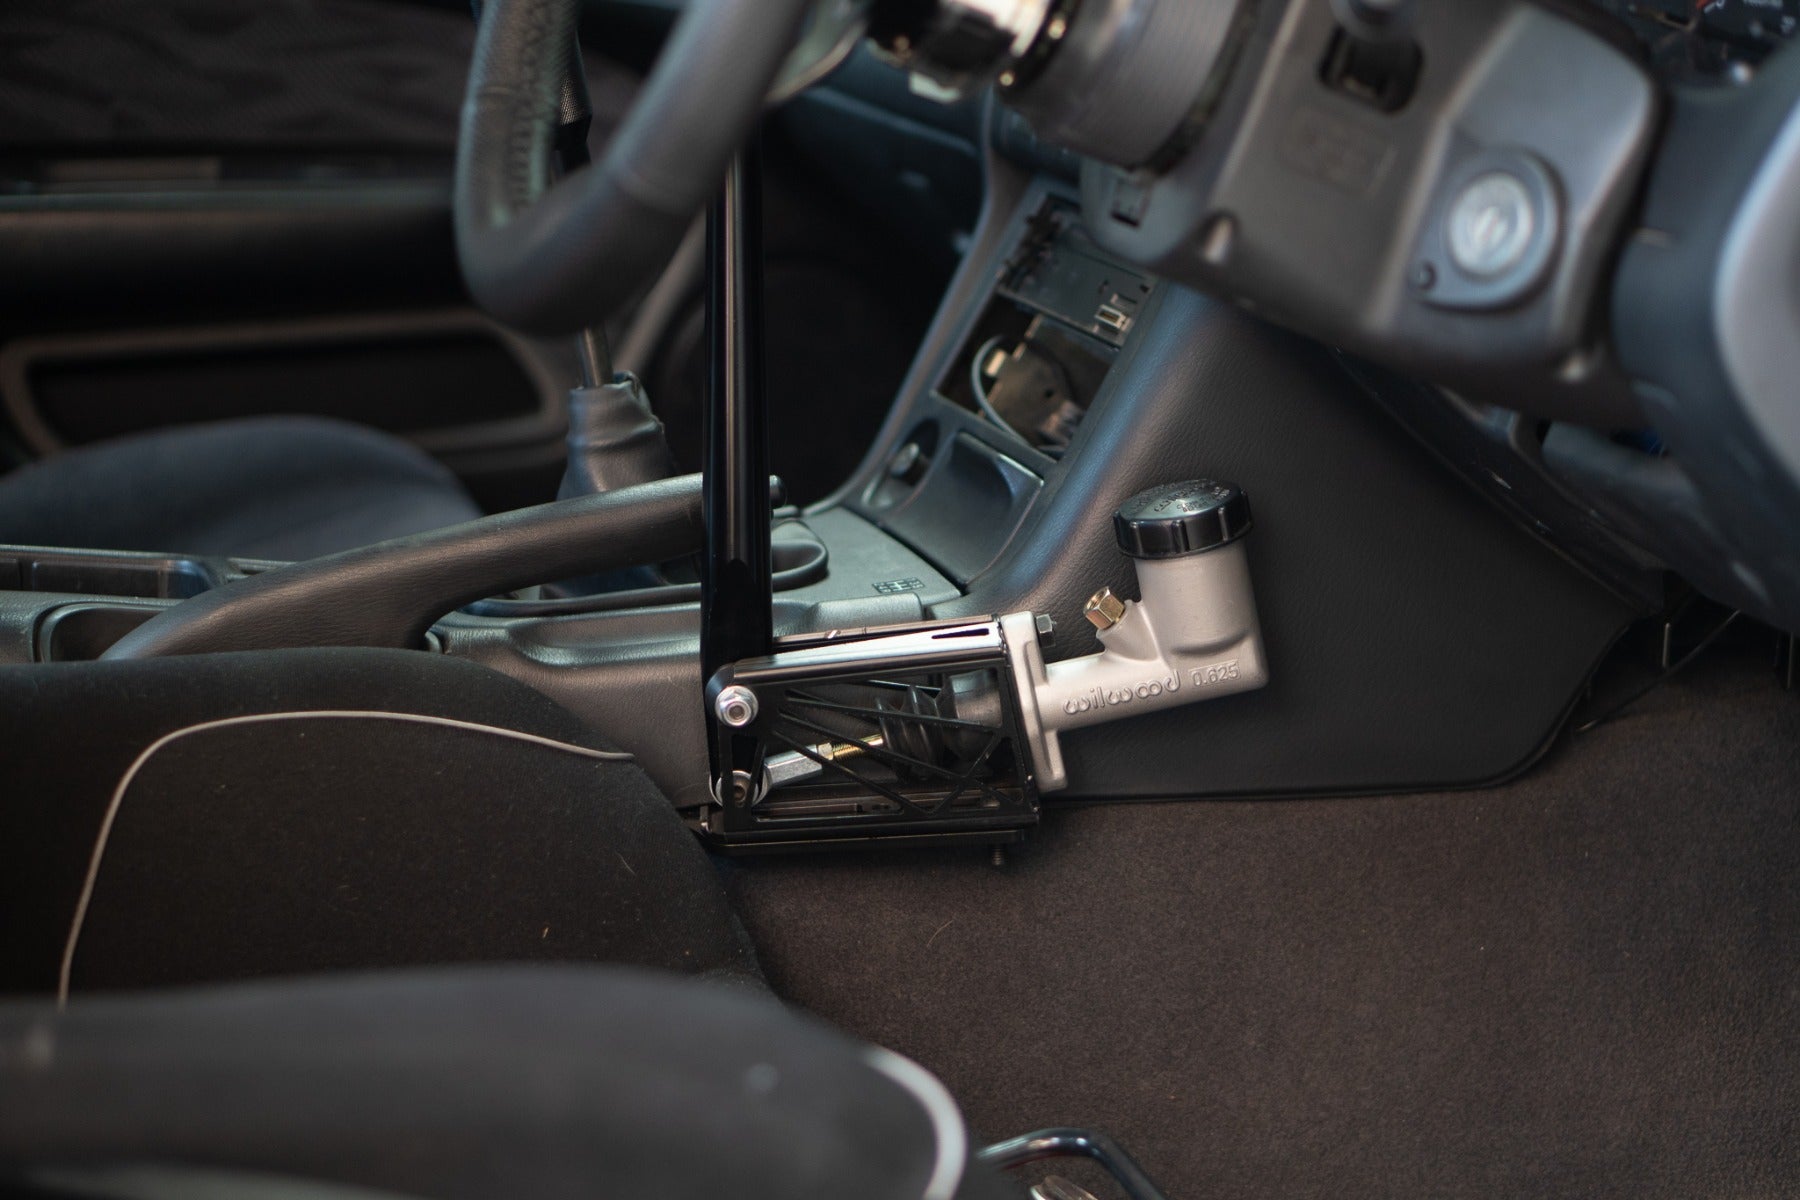 S-chassis car specific handbrake mount